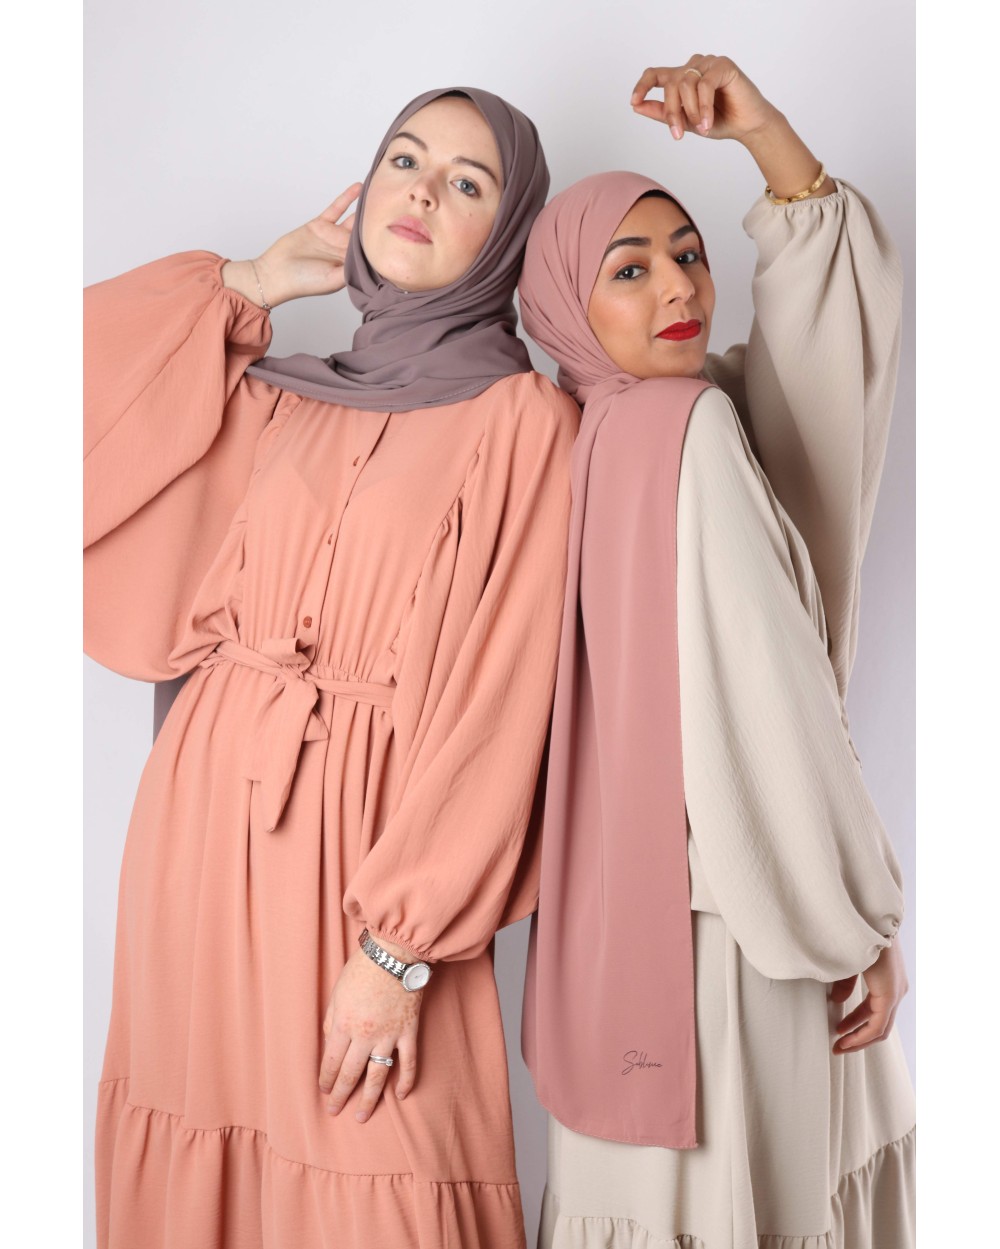 Rassena dress with ruffle and butterfly